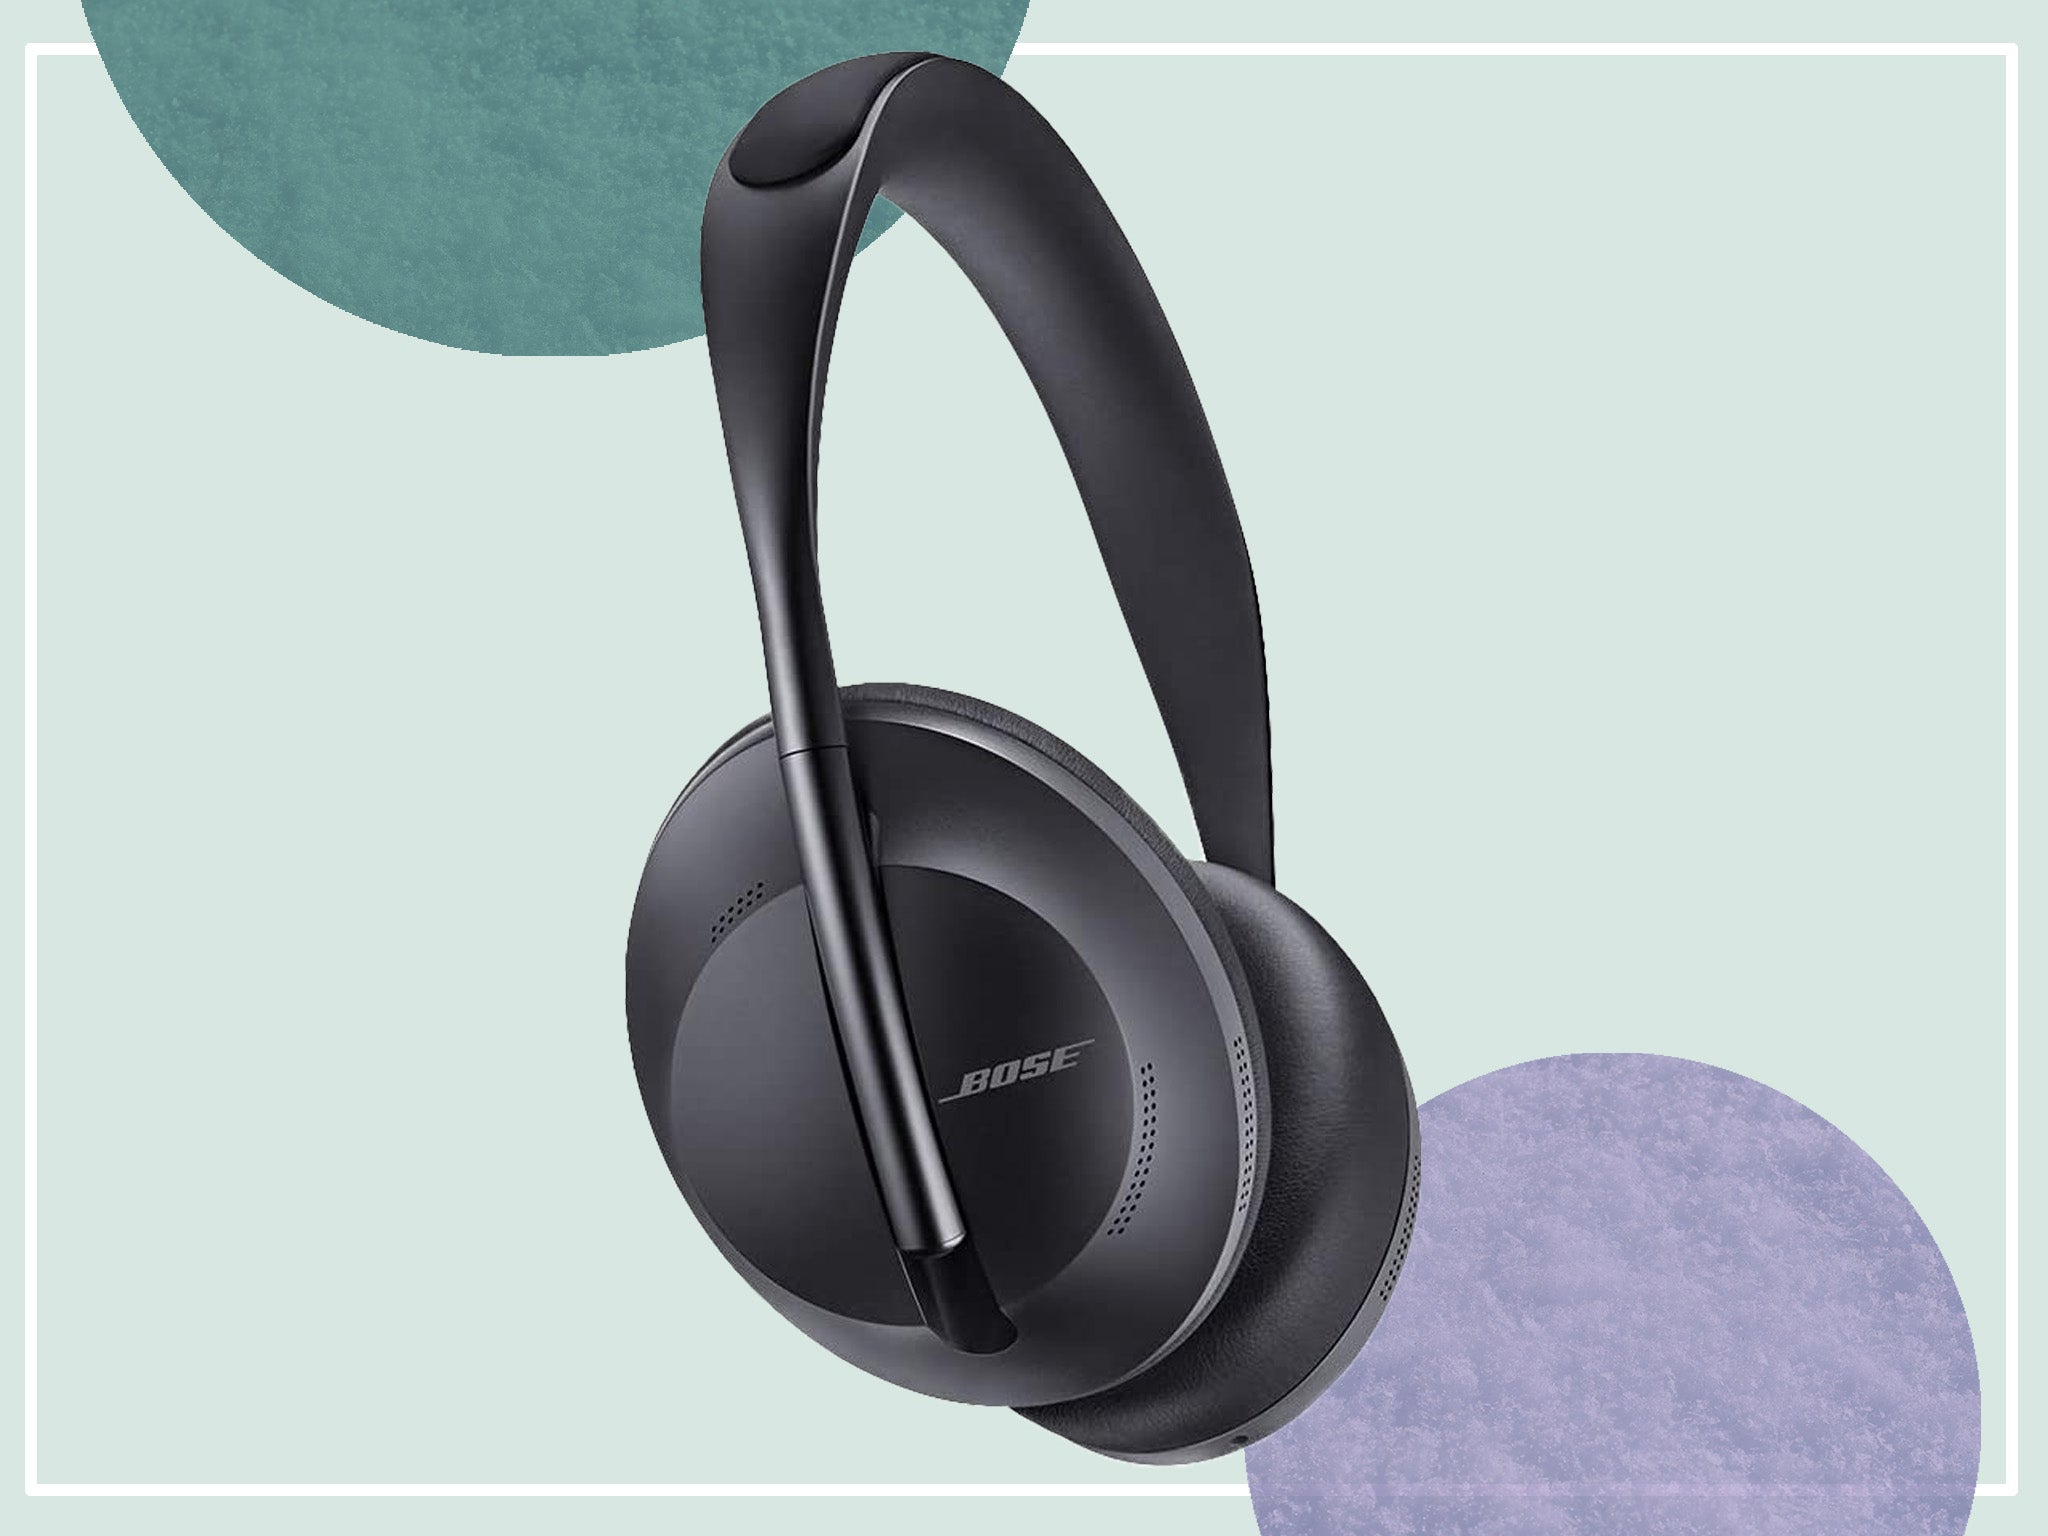 https://static.independent.co.uk/2022/10/11/10/Bose%20Noise%20Cancelling%20Headphones%20copy.jpg